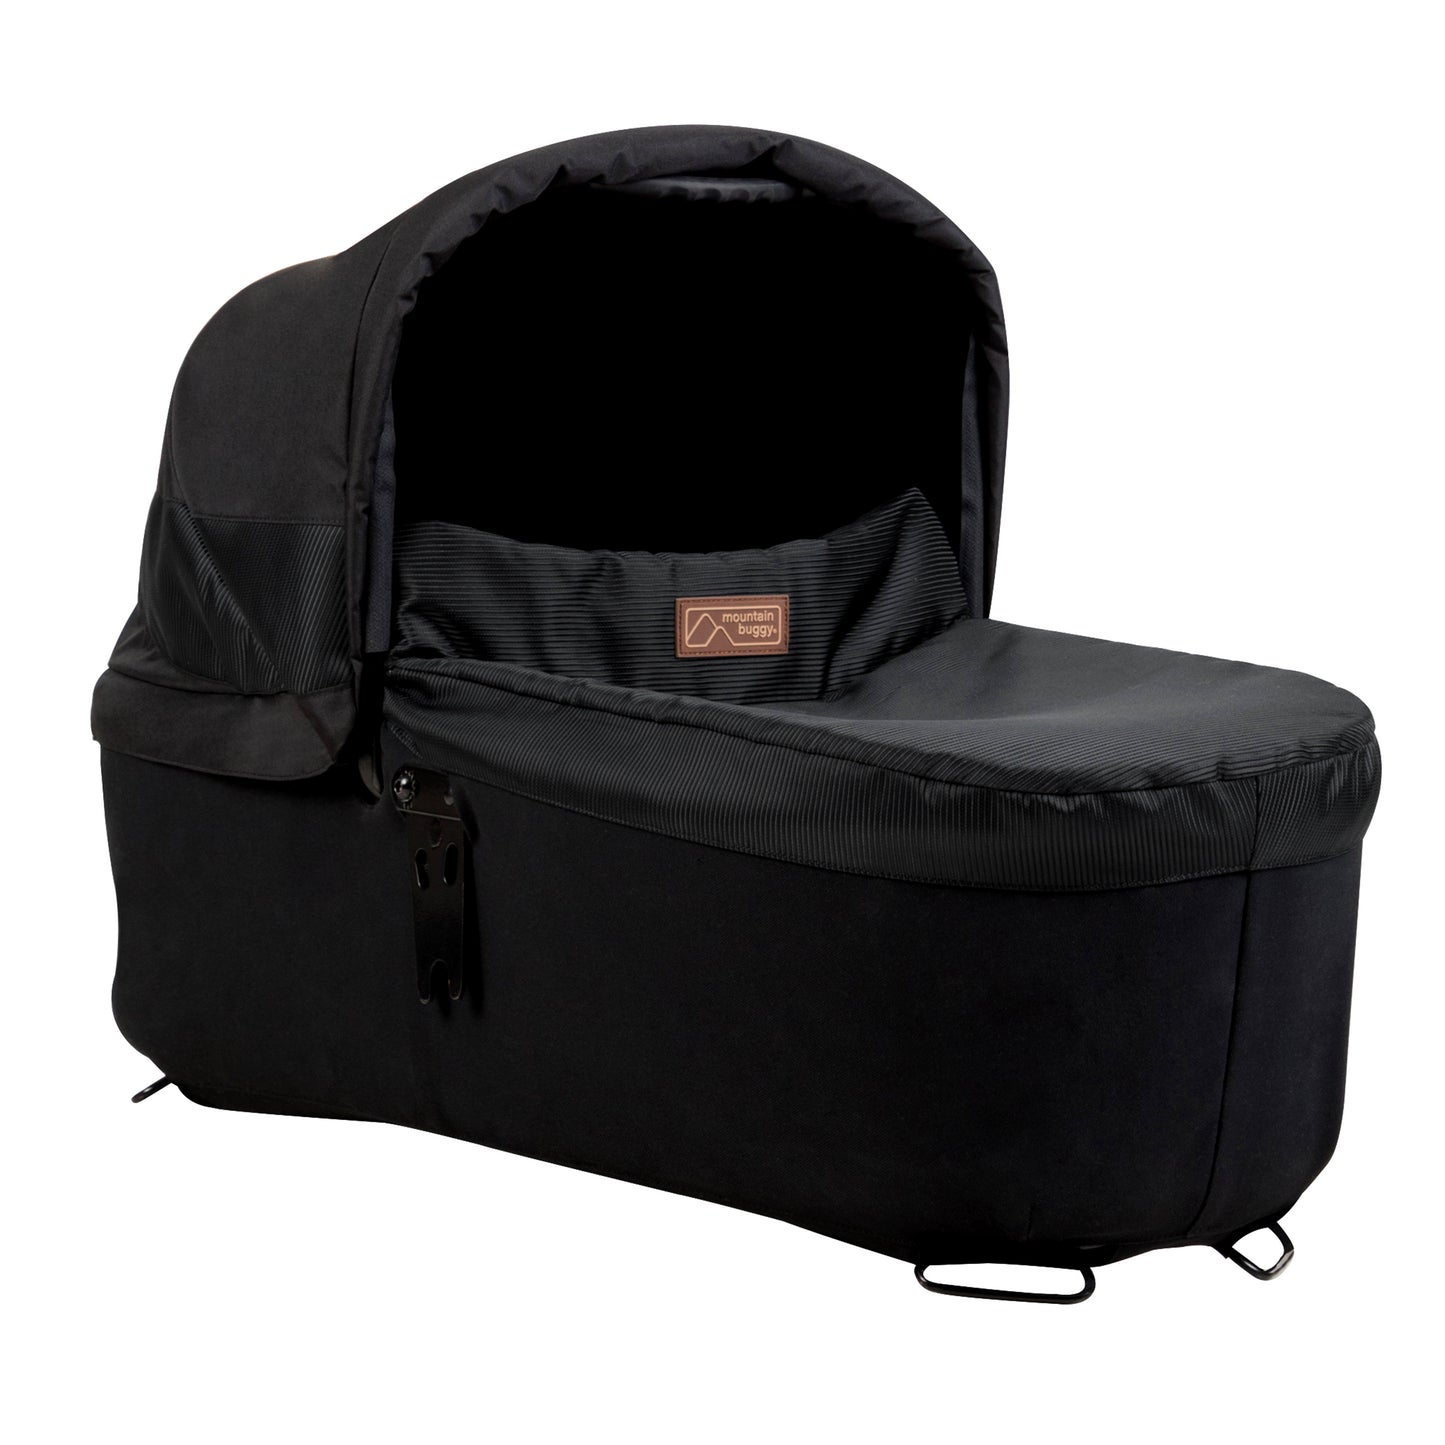 Mountain Buggy Carrycot plus for Urban Jungle Terrain and +one in Onyx